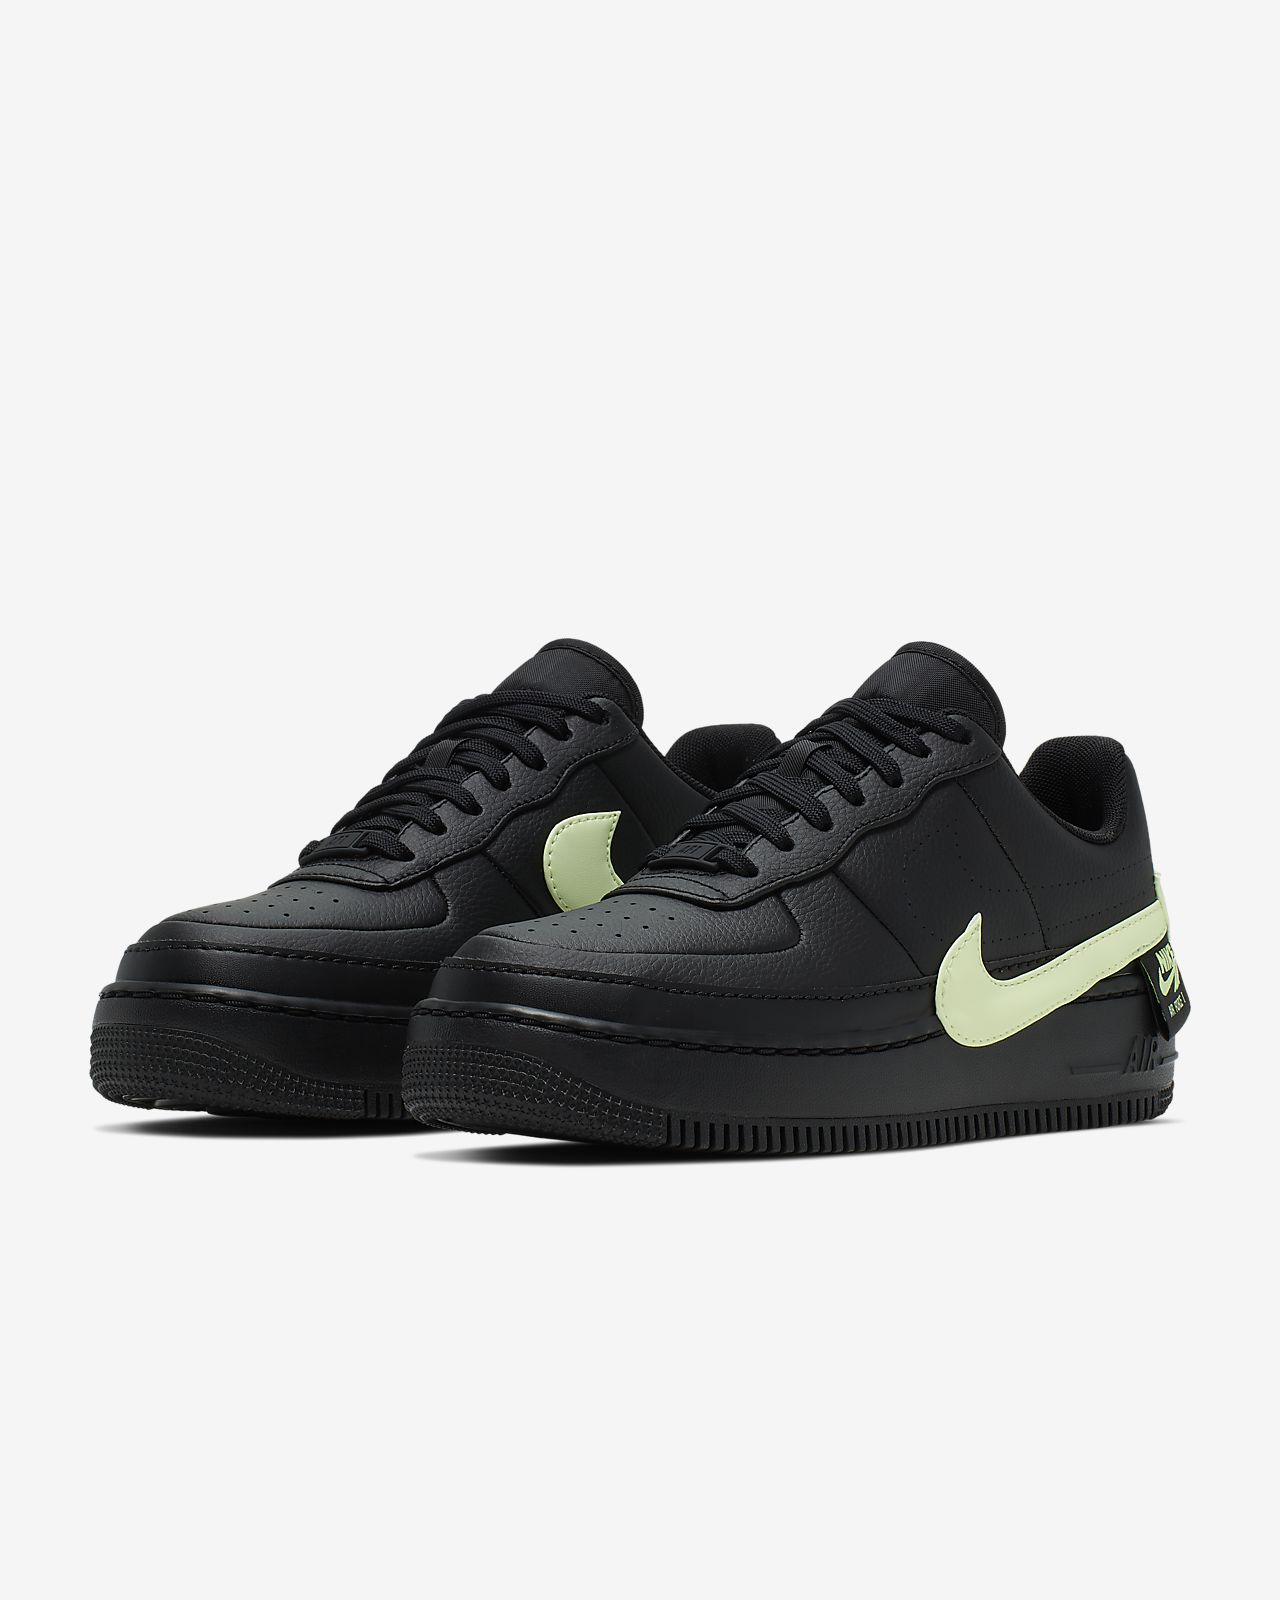 nike black and fluro green air force 1 jester trainers